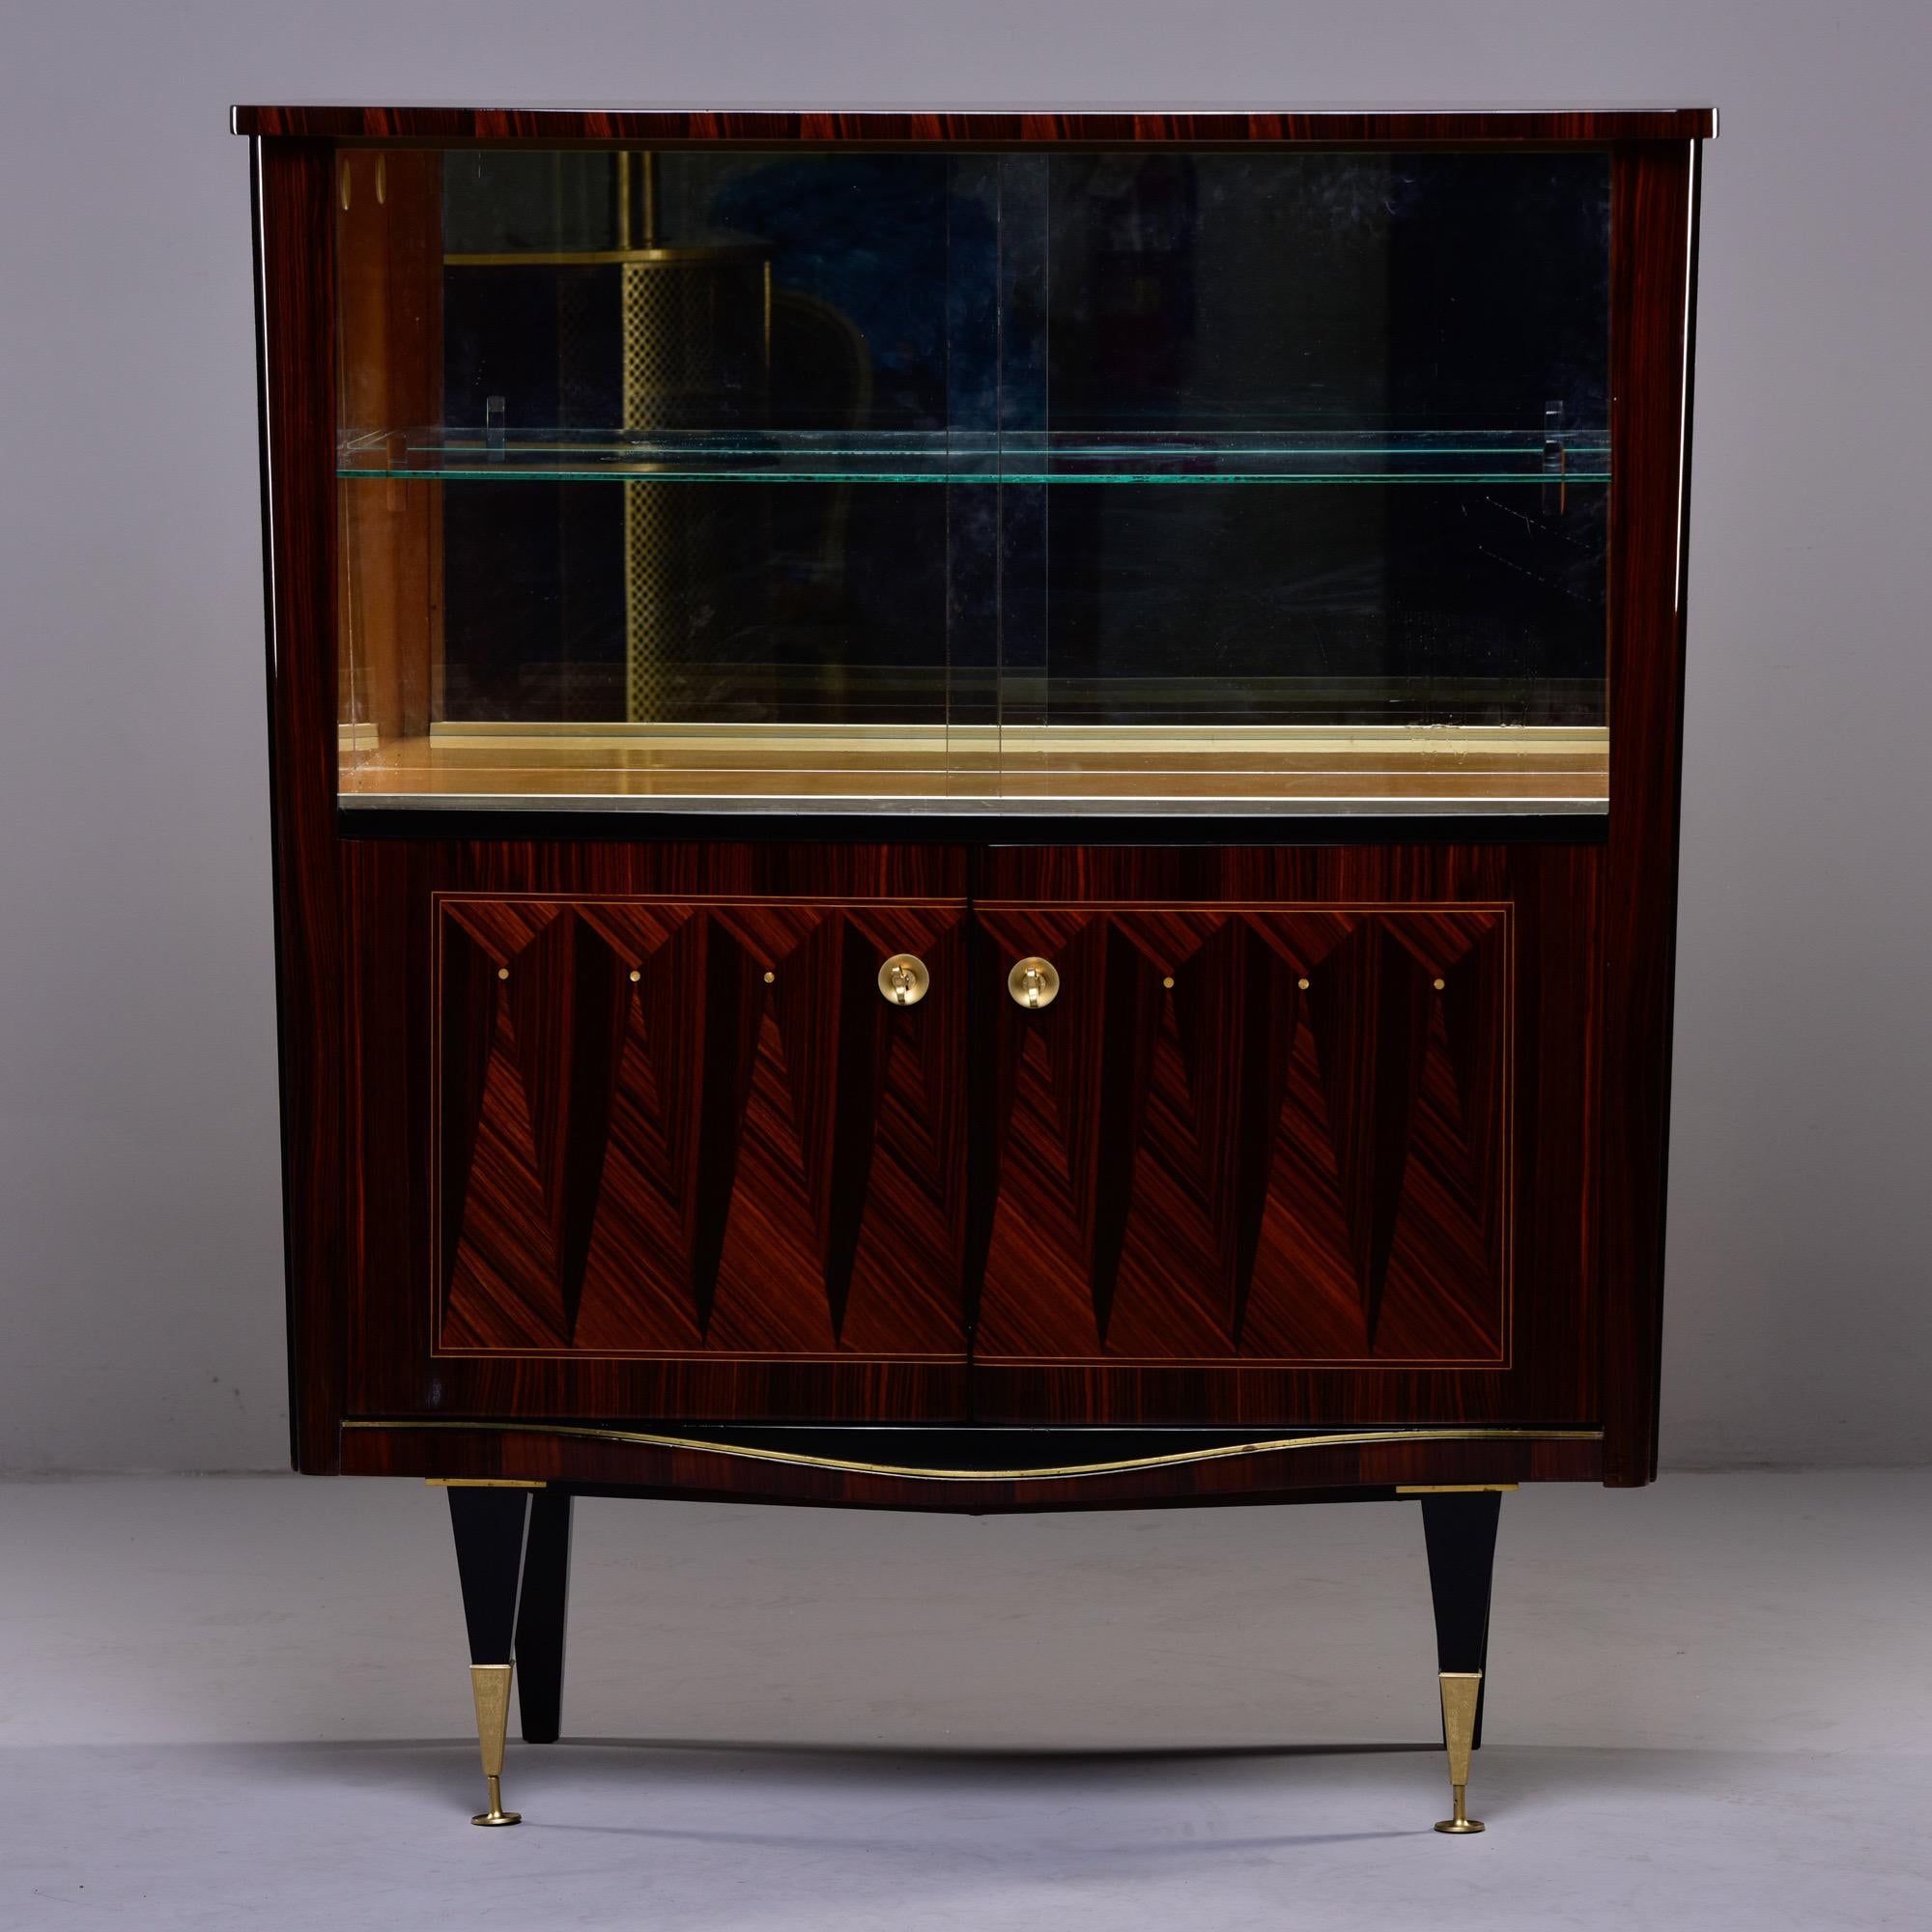 Circa 1940s French Art Deco bar cabinet or vitrine in macassar with marquetry pattern on lower cabinet doors, contrasting maple interior trim and single adjustable glass shelf. Brass capped front legs. Top compartment has sliding glass doors and